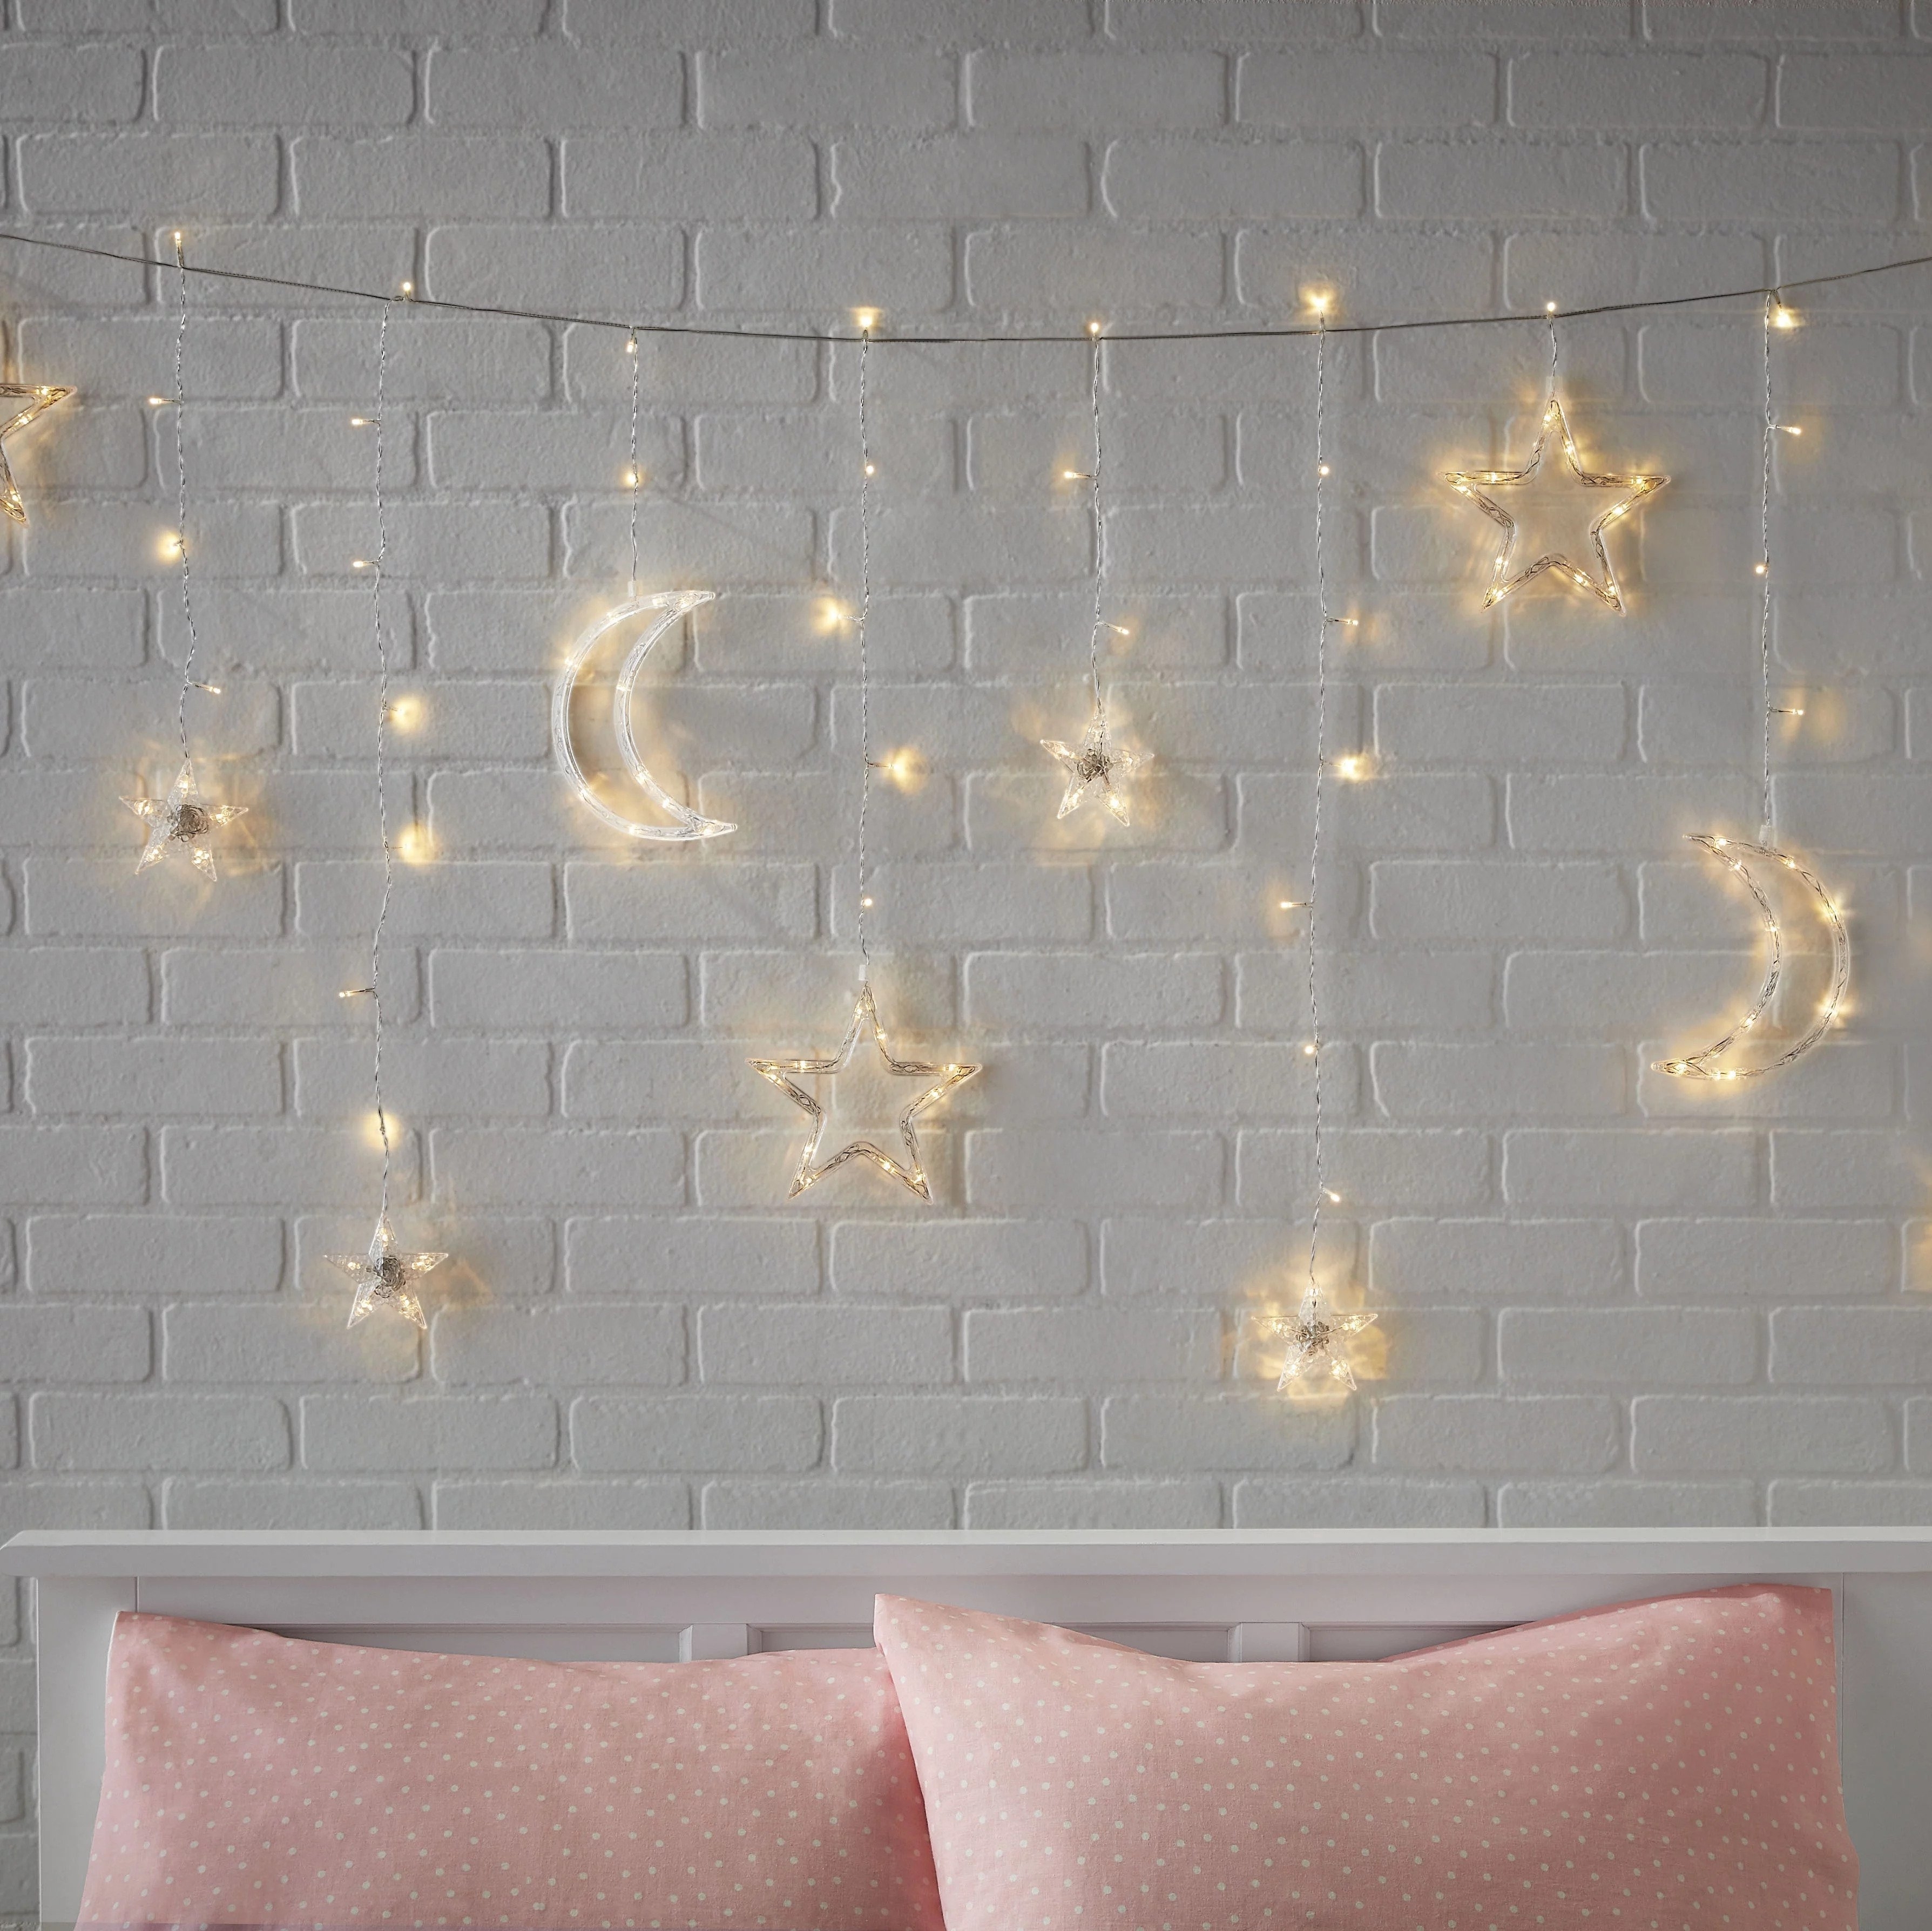 The lights in a stars and moons design